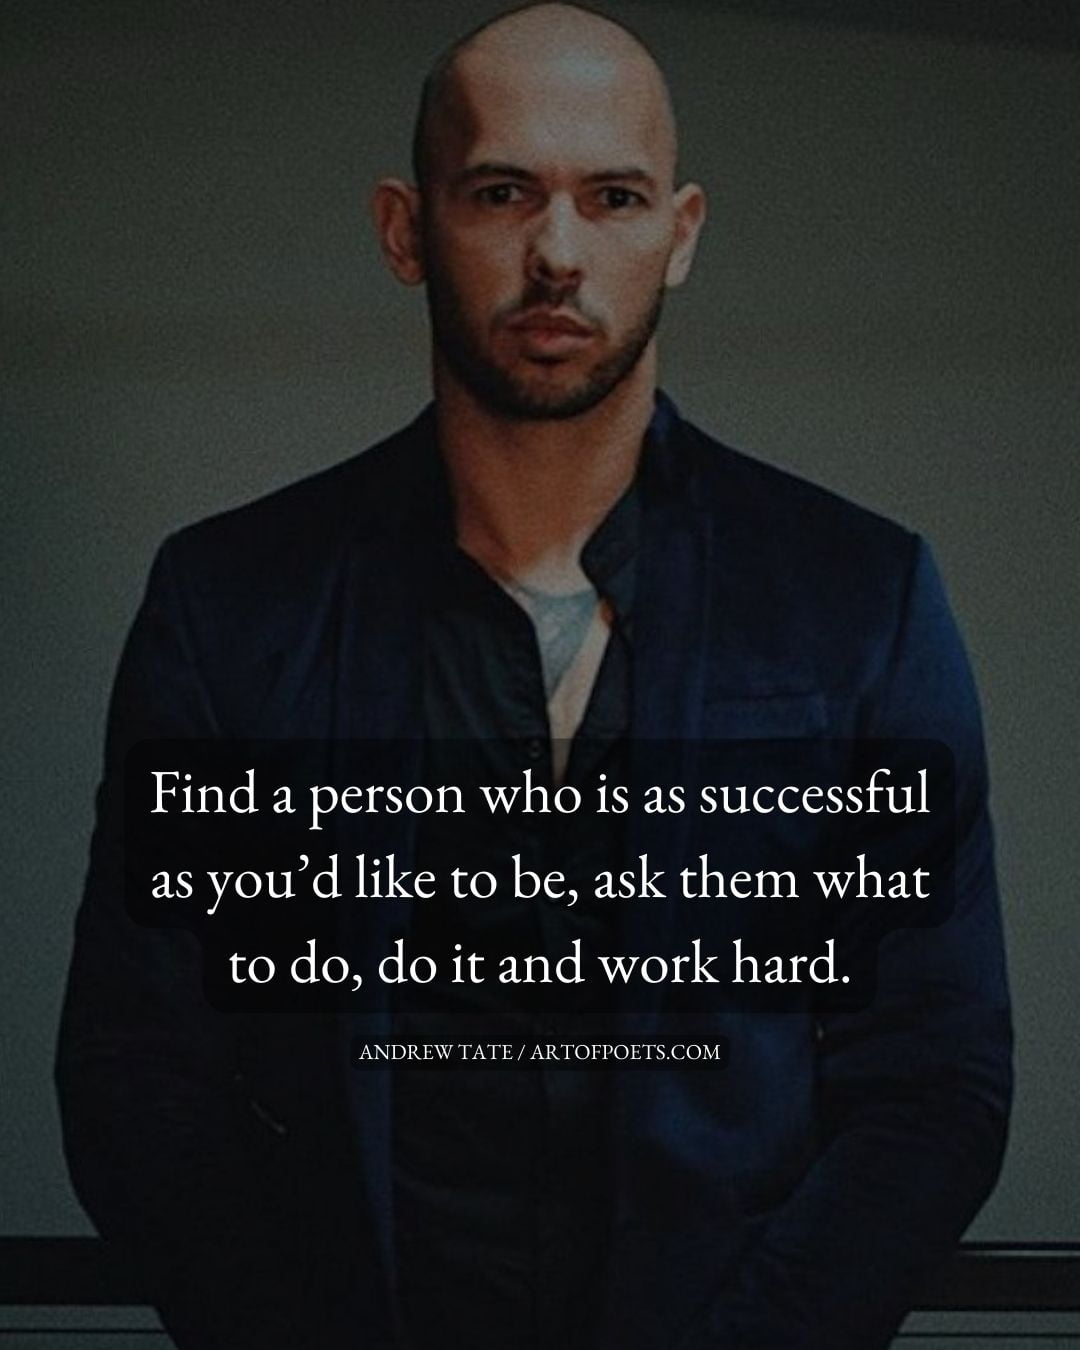 Find a person who is as successful as youd like to be ask them what to do do it and work hard 1